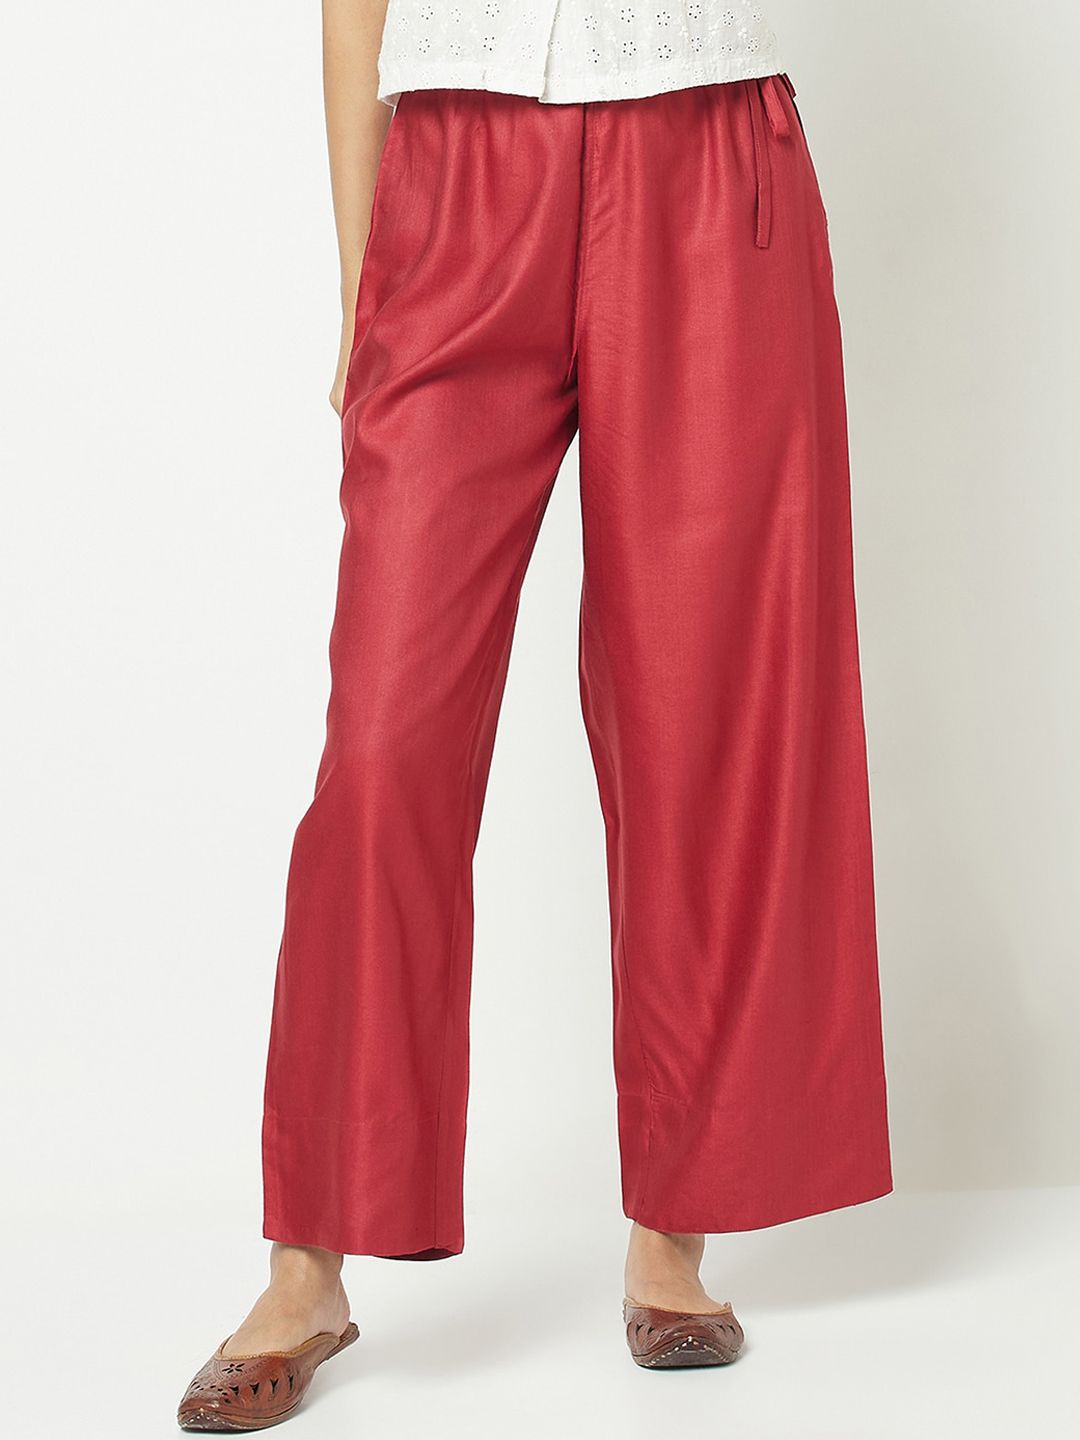 Fabindia Women Maroon Parallel Trousers Price in India